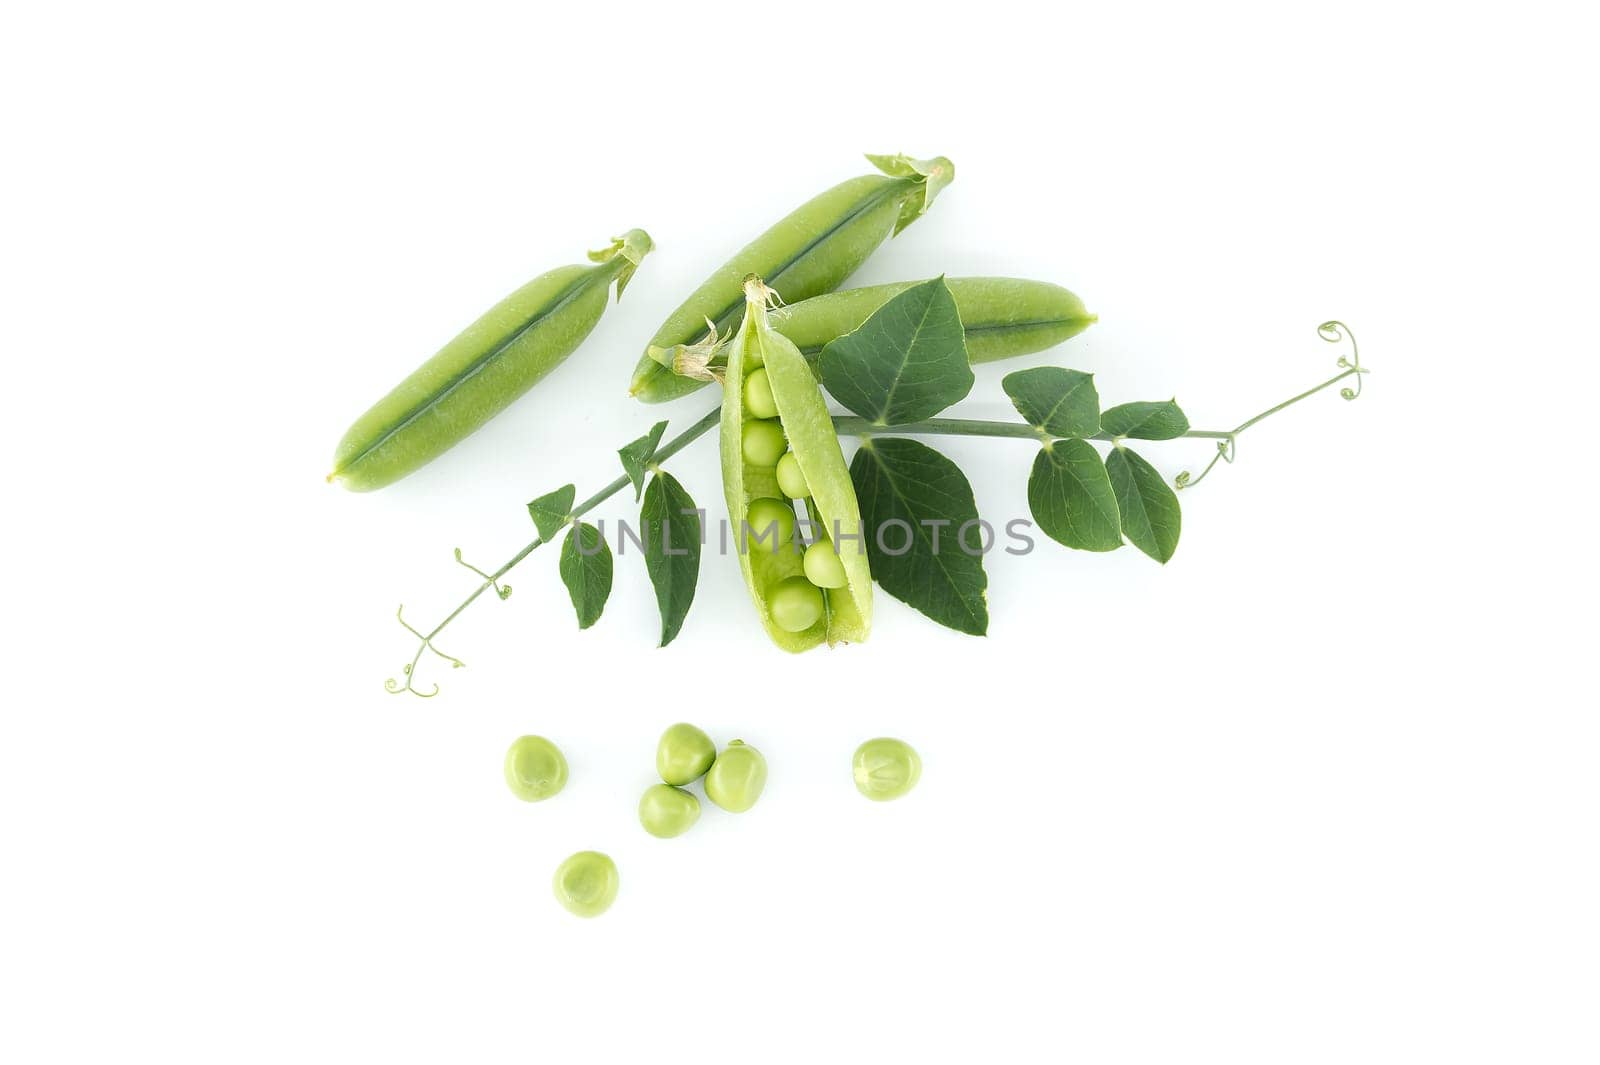 Group of green pea pods and peas isolated on white by NetPix